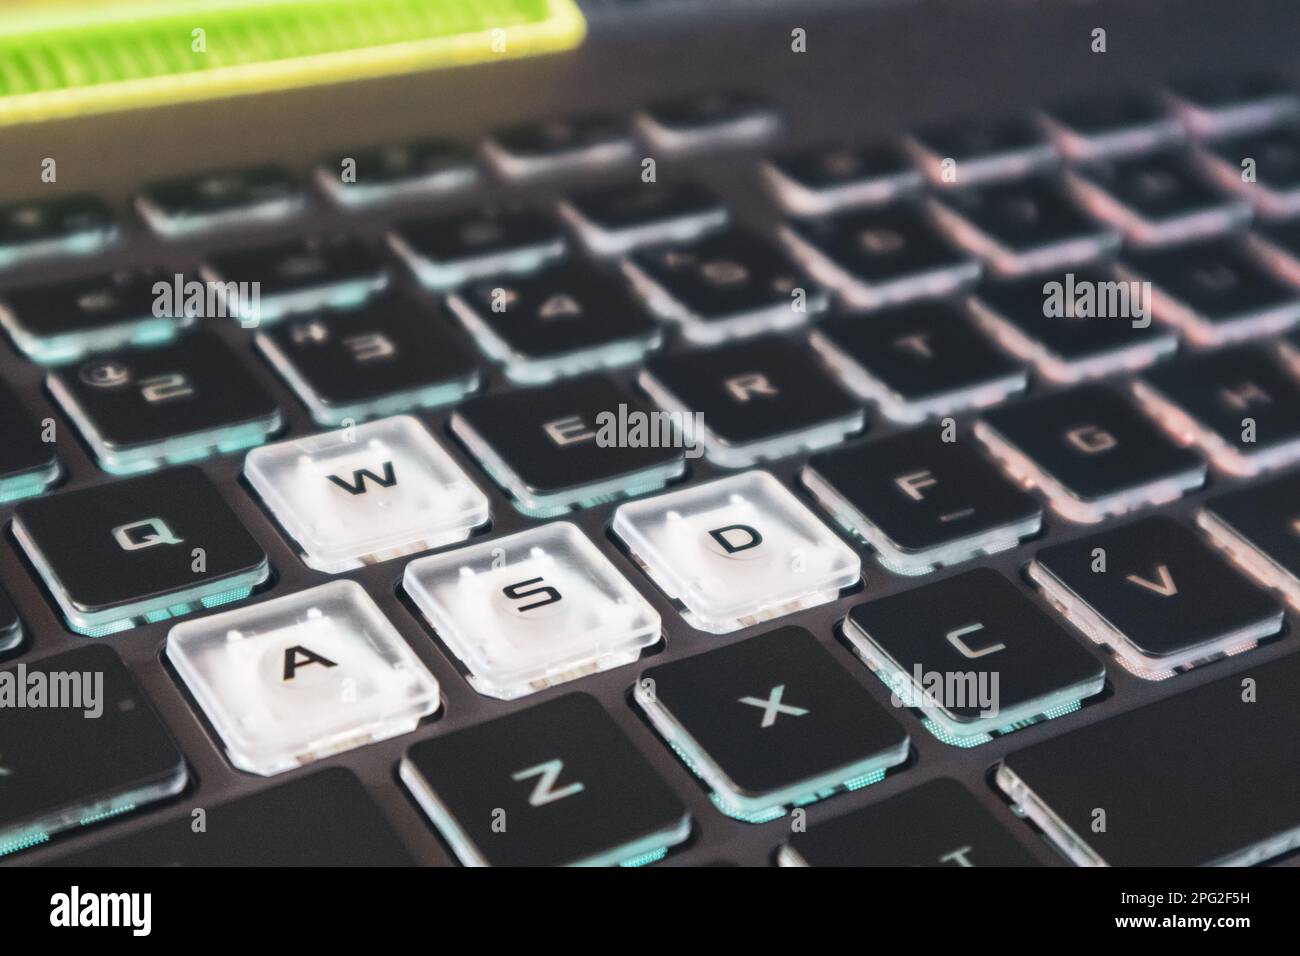 Highlighted gaming keys with focus blur. Powerful dark notebook keyboard close-up. Tech, IT, e-sport, computer science background Stock Photo